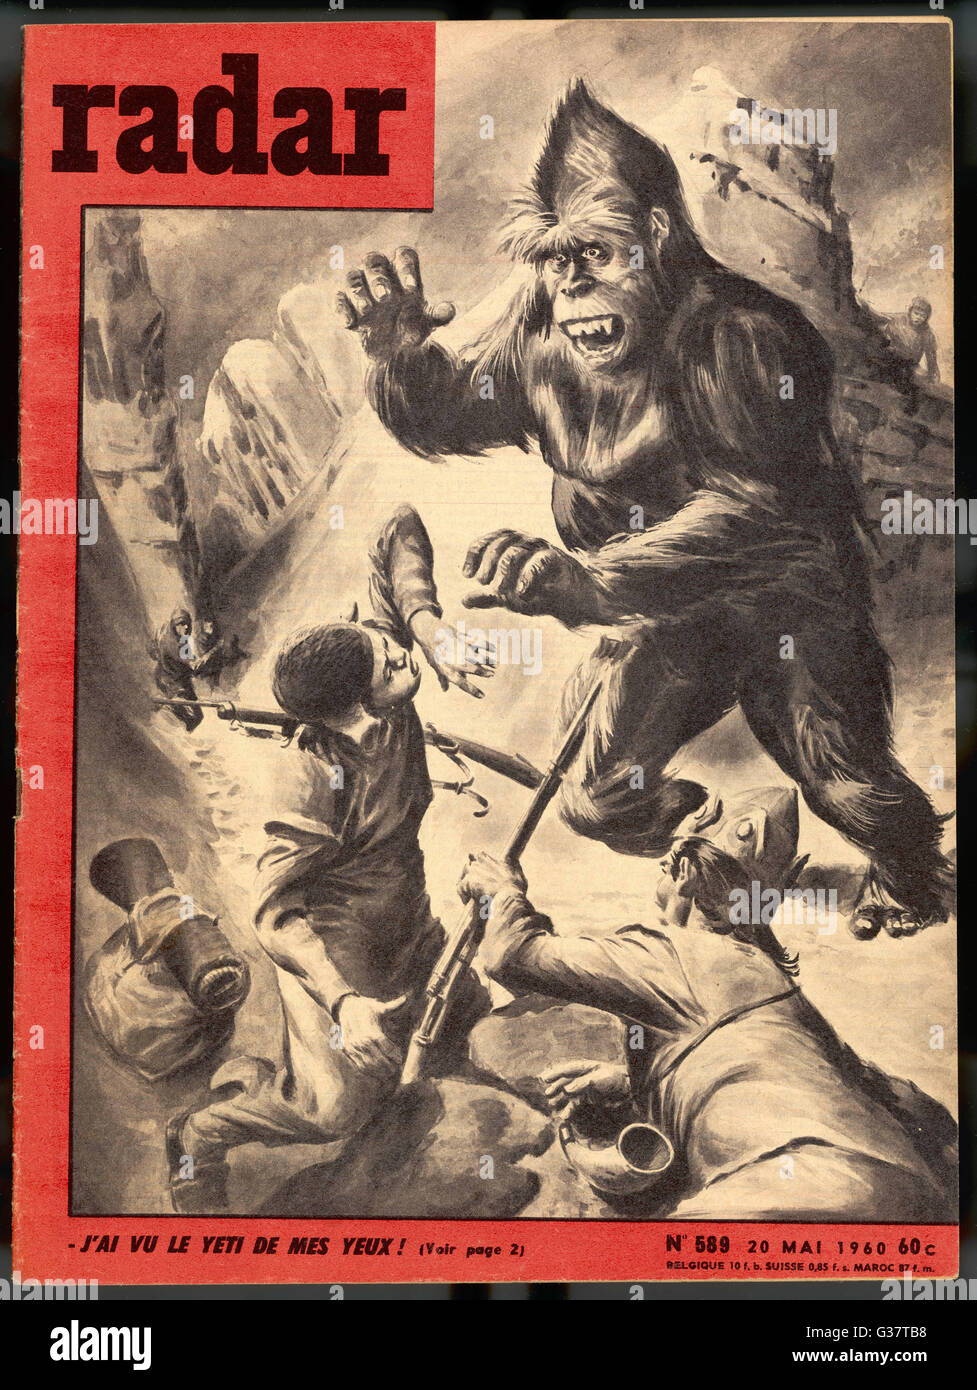 Tibetan refugees, fleeing into  Nepal, encounter a yeti, but  he is more frightened by them  than they of him       Date: May 1960 Stock Photo